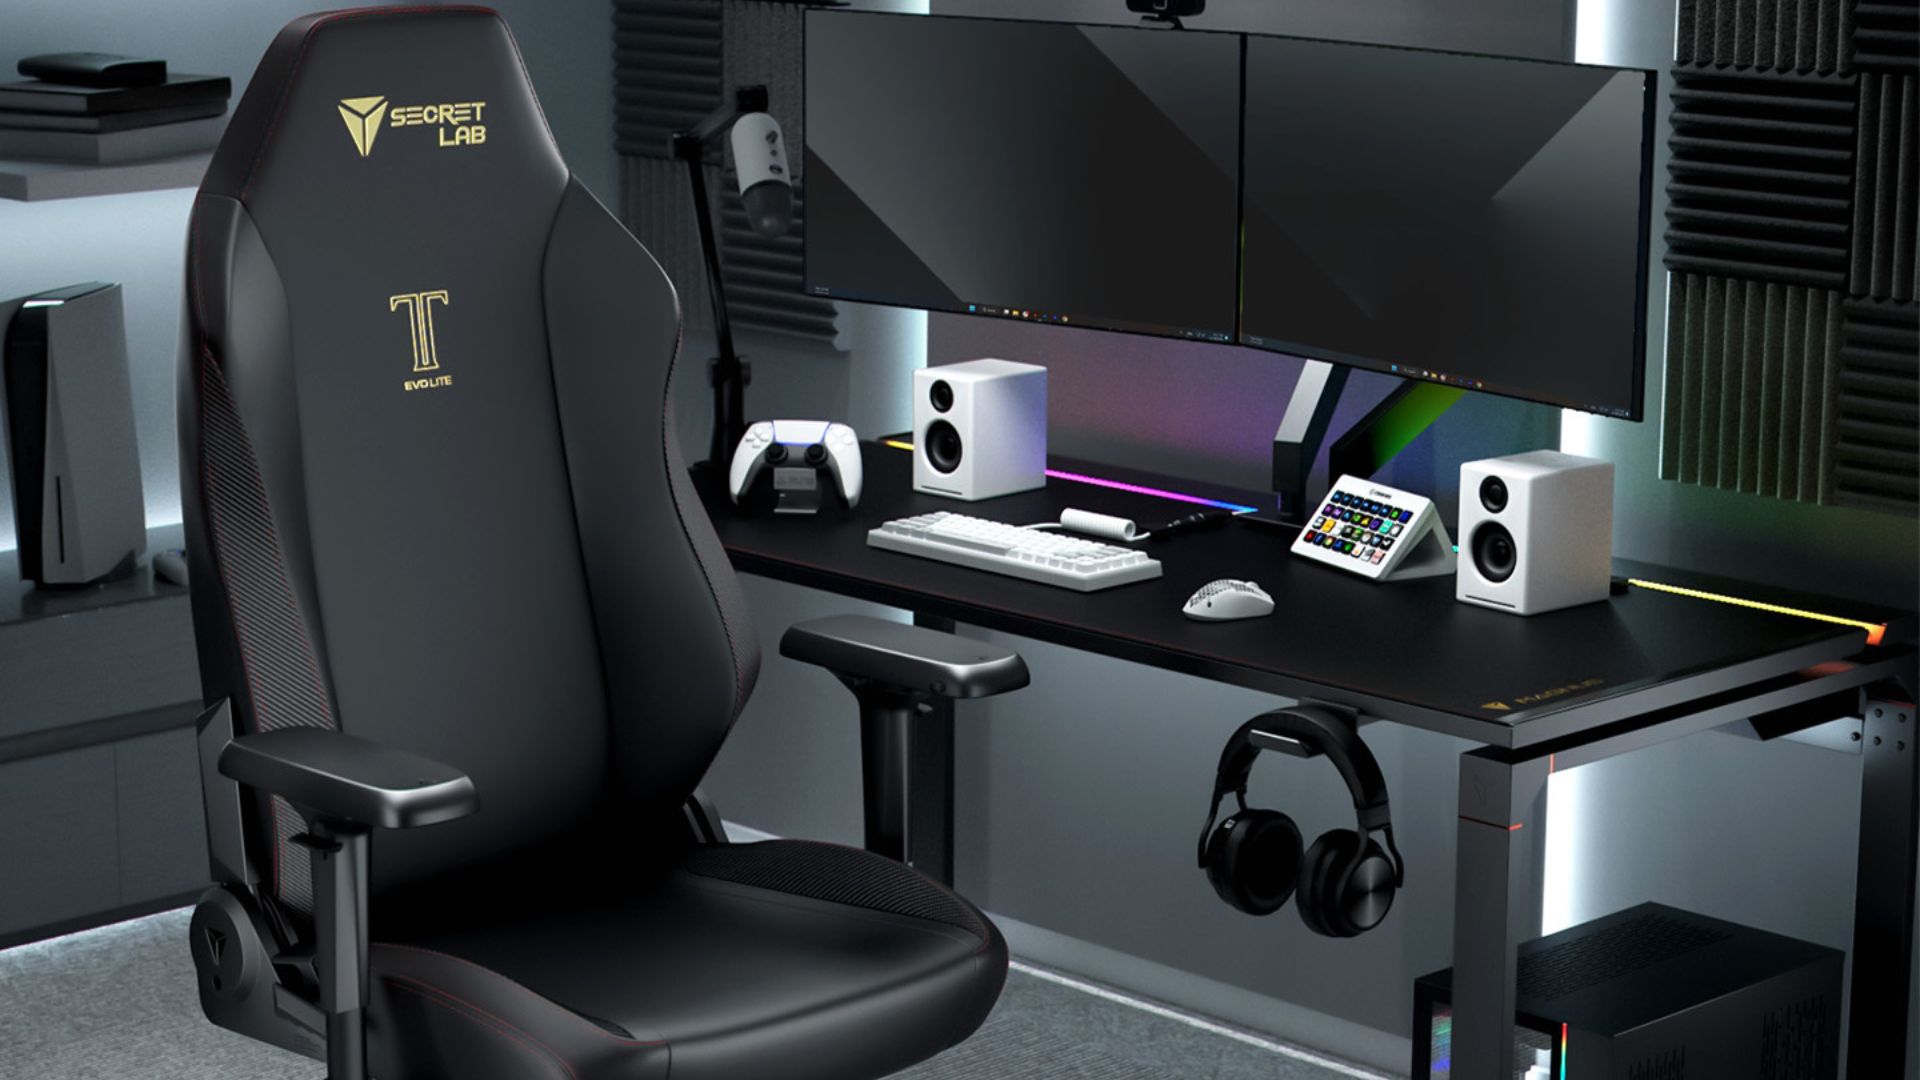 Secretlab finally has a new gaming chair, and it's a bit 'lighter